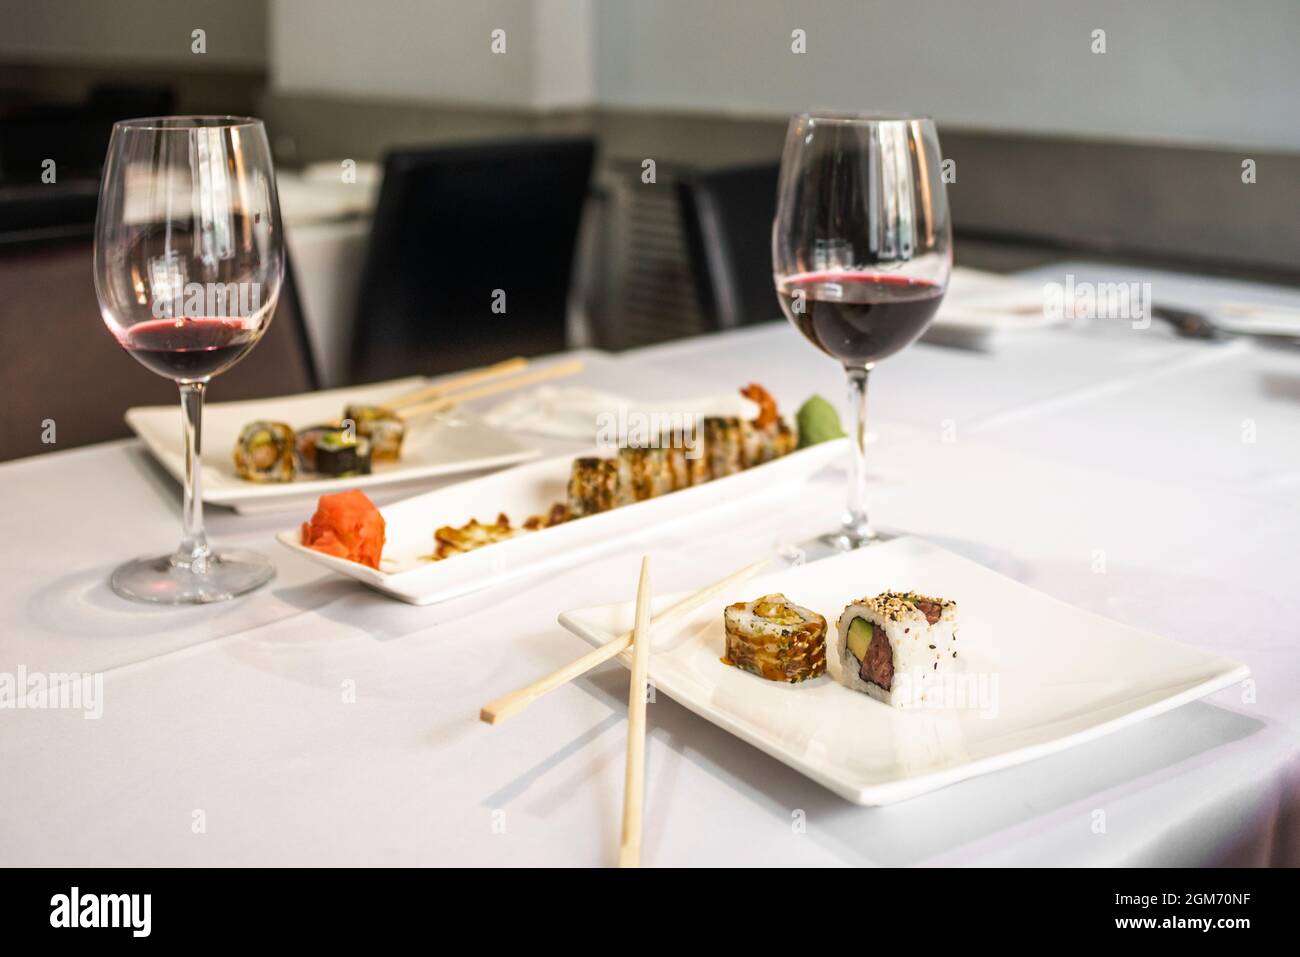 Assorted uramaki dishes with wine glasses on restaurant table with white tablecloths Stock Photo